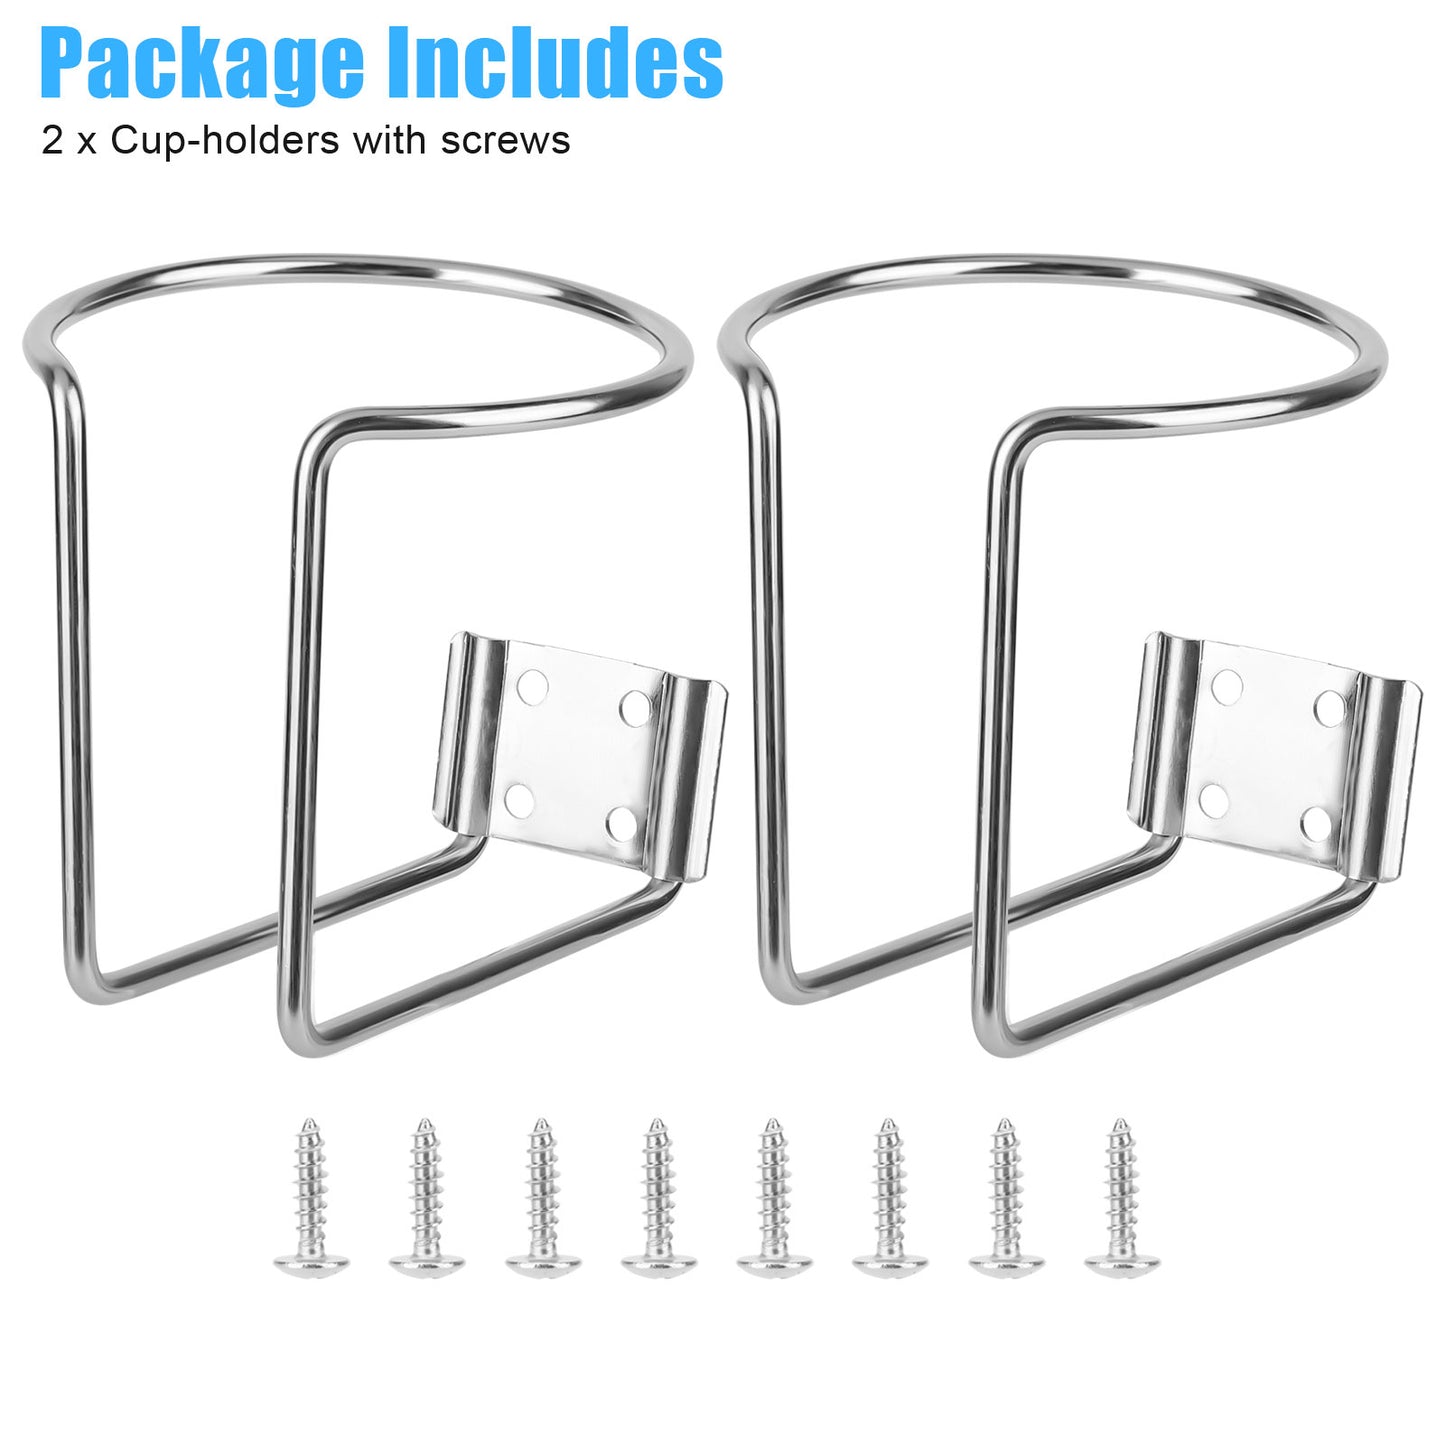 2 Pcs Stainless Steel Cup Holder Adjustable for Boat Truck RV